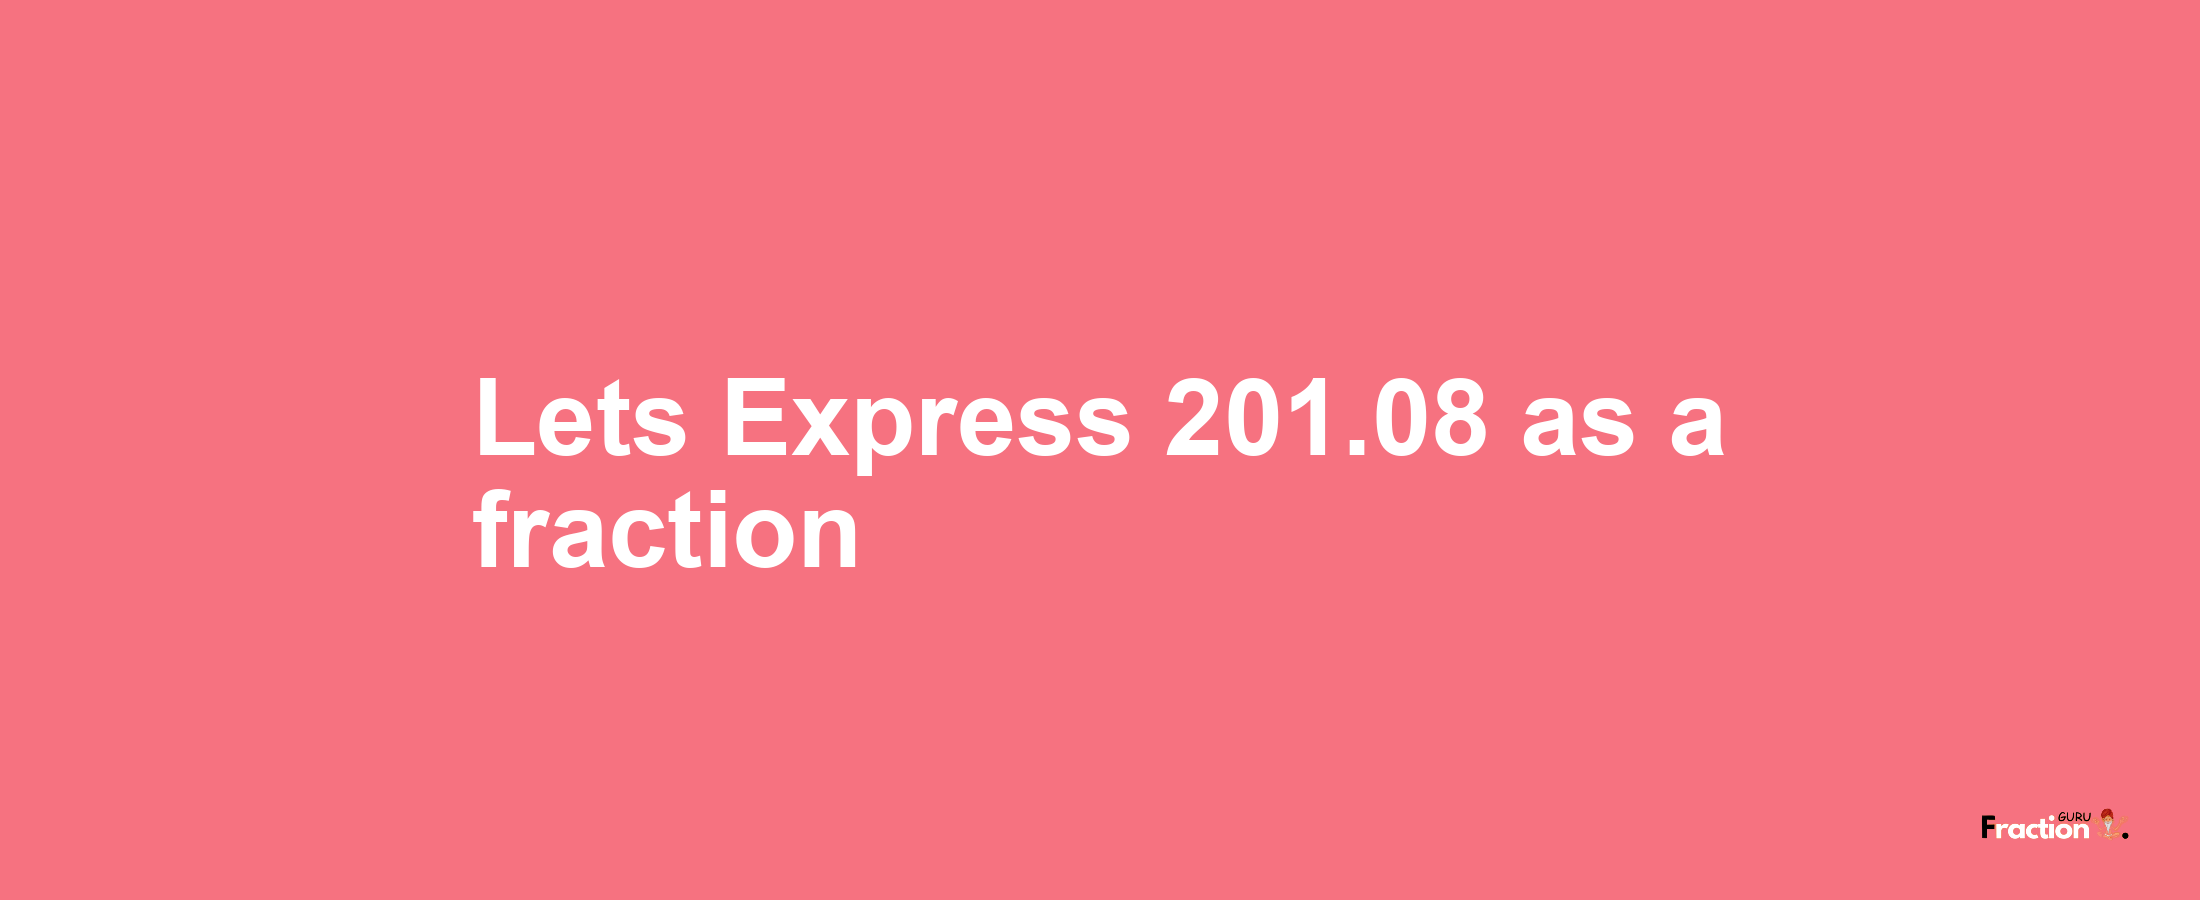 Lets Express 201.08 as afraction